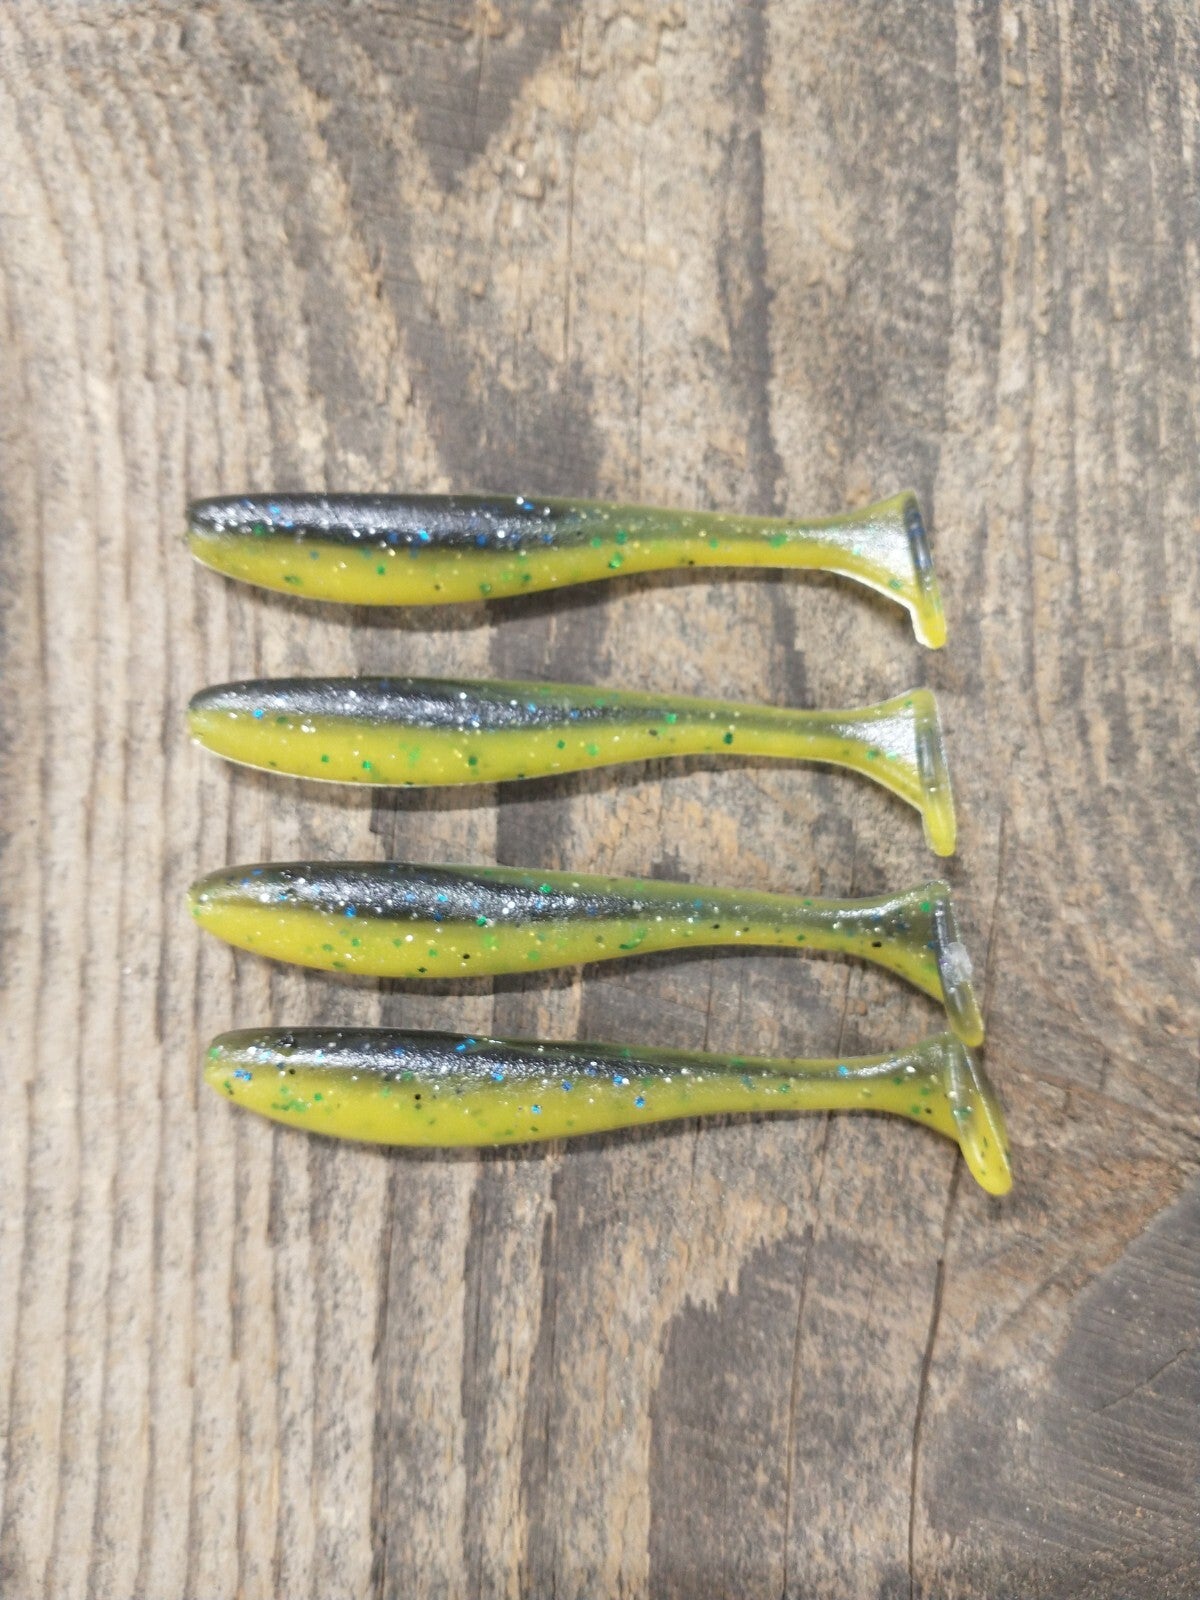 A-Game Custom Lures 3.5" Shiner - Hamilton Bait and Tackle